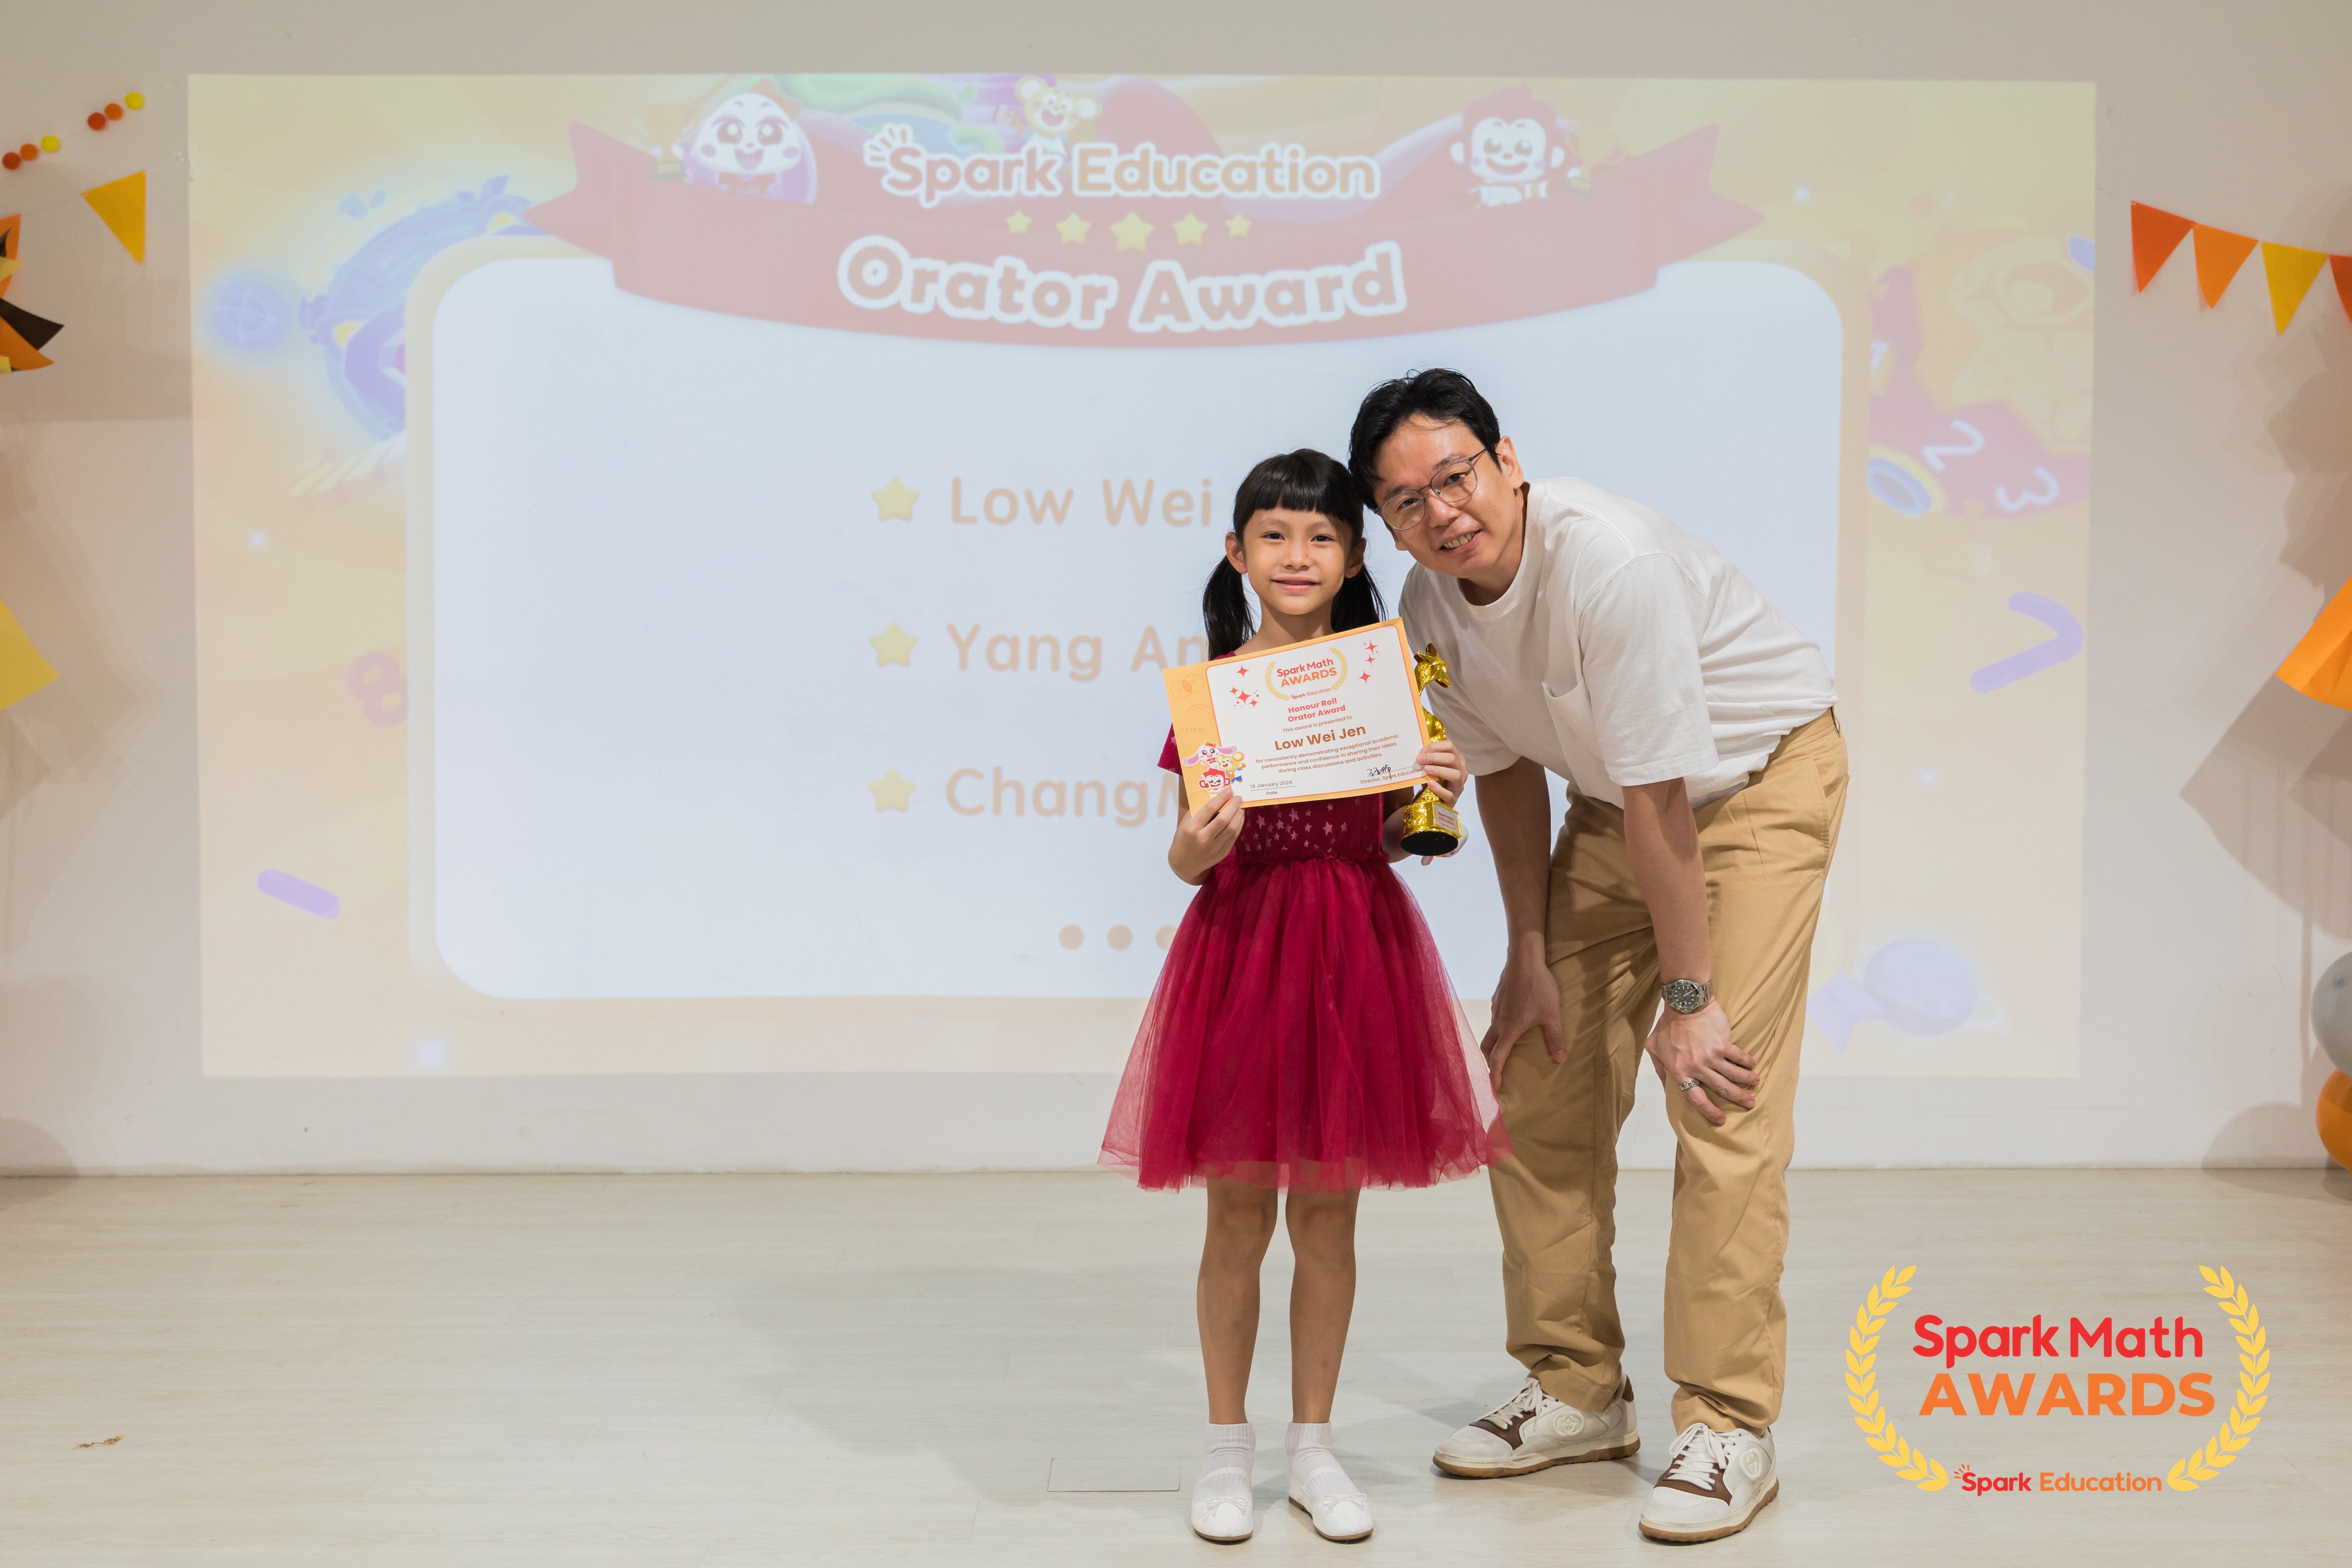 Teacher Roy, Upper Primary Curriculum Specialist, presenting Honour Roll and Orator awards to top performing Spark Math students who have shown confidence in sharing ideas in class discussions and Little Teacher Presentations.